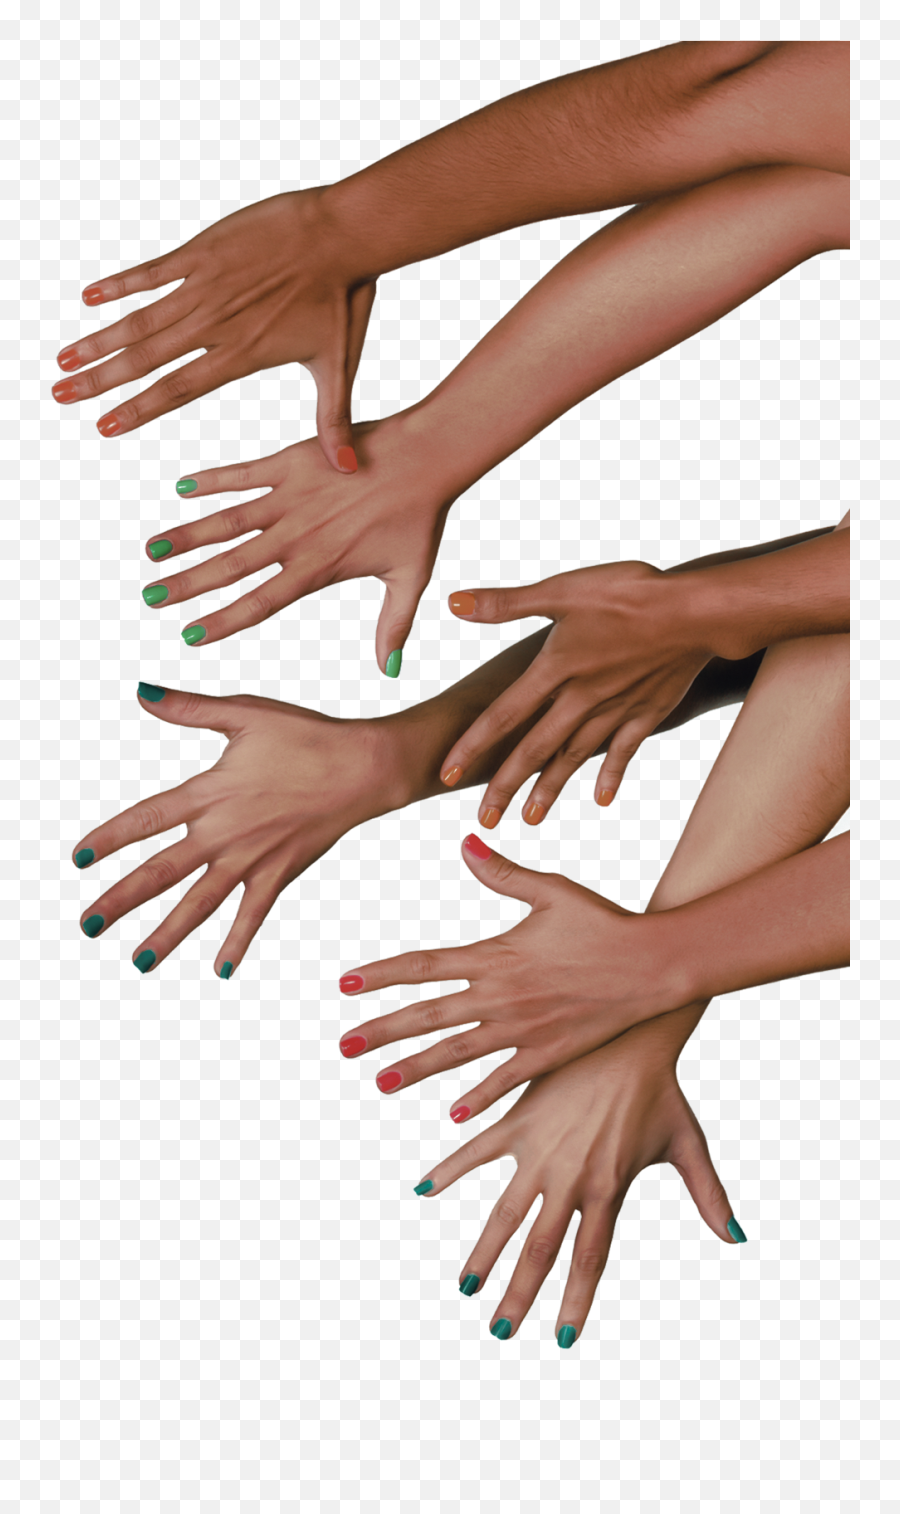 Hands Png Images Download Hd In 2020 Photo Editing - Hands Png For Editing,Hands Png